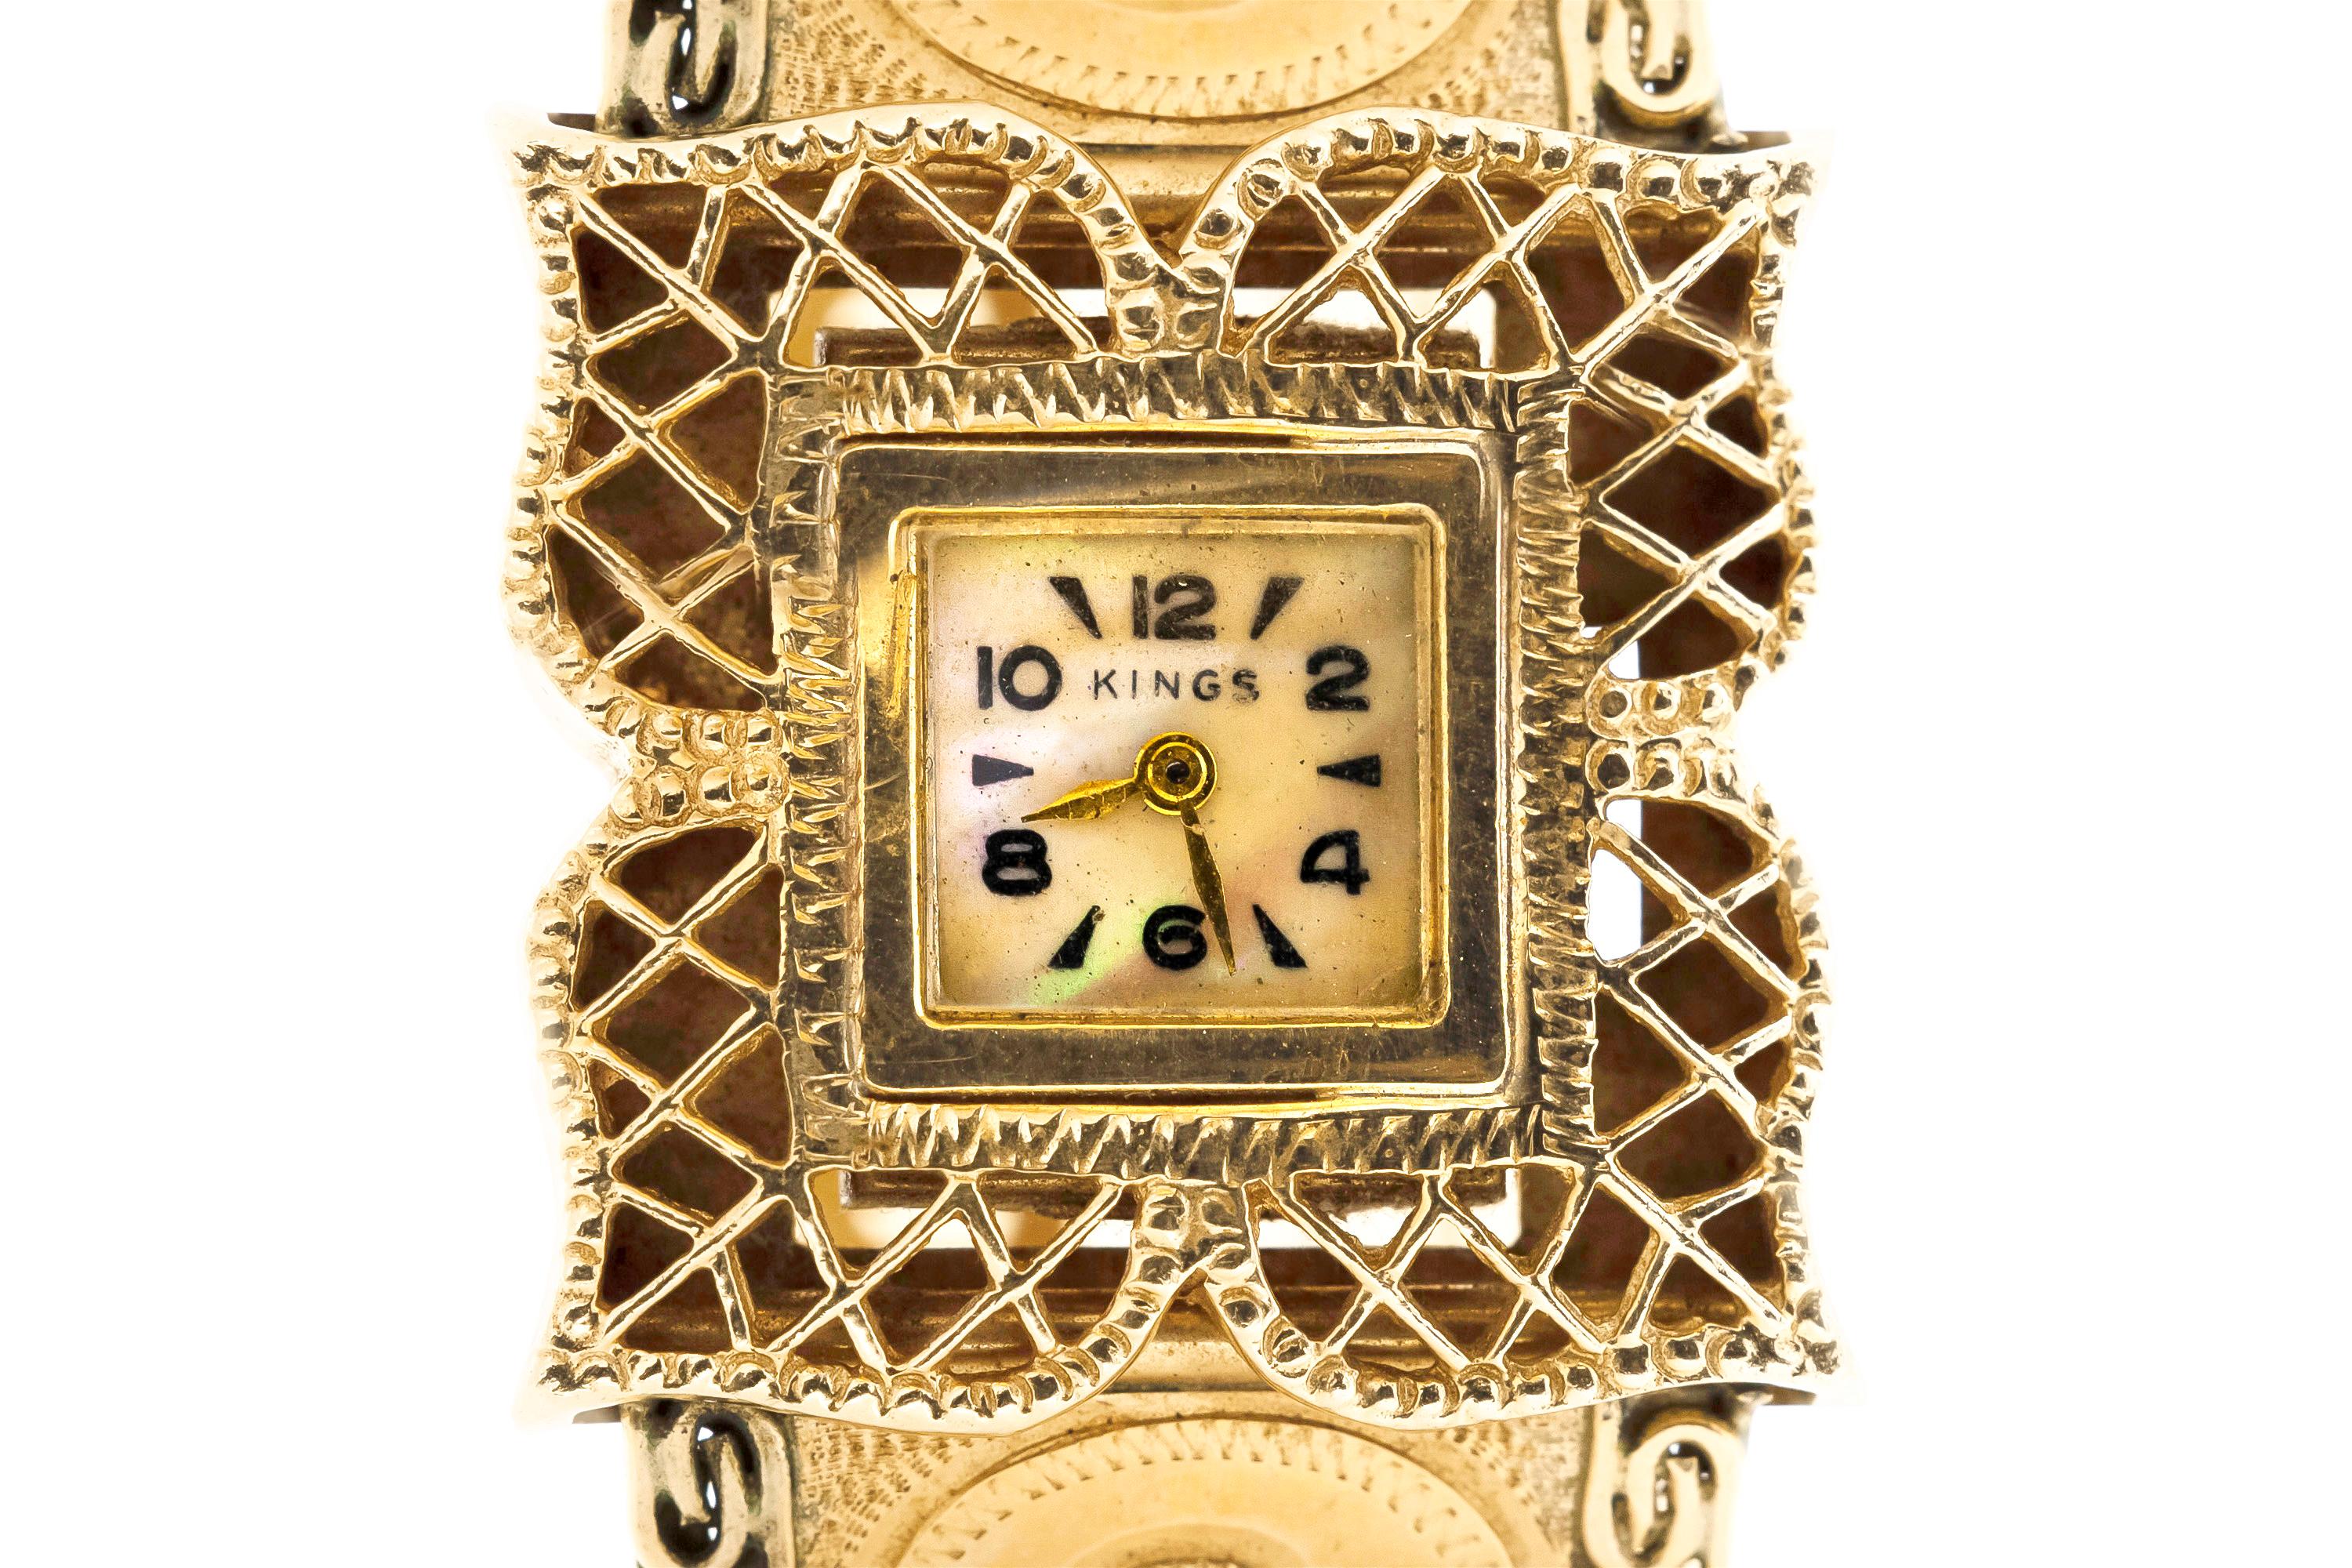 Finely crafted in 14k yellow gold with a hidden watch.
Circa 1950s
Size 6 1/2